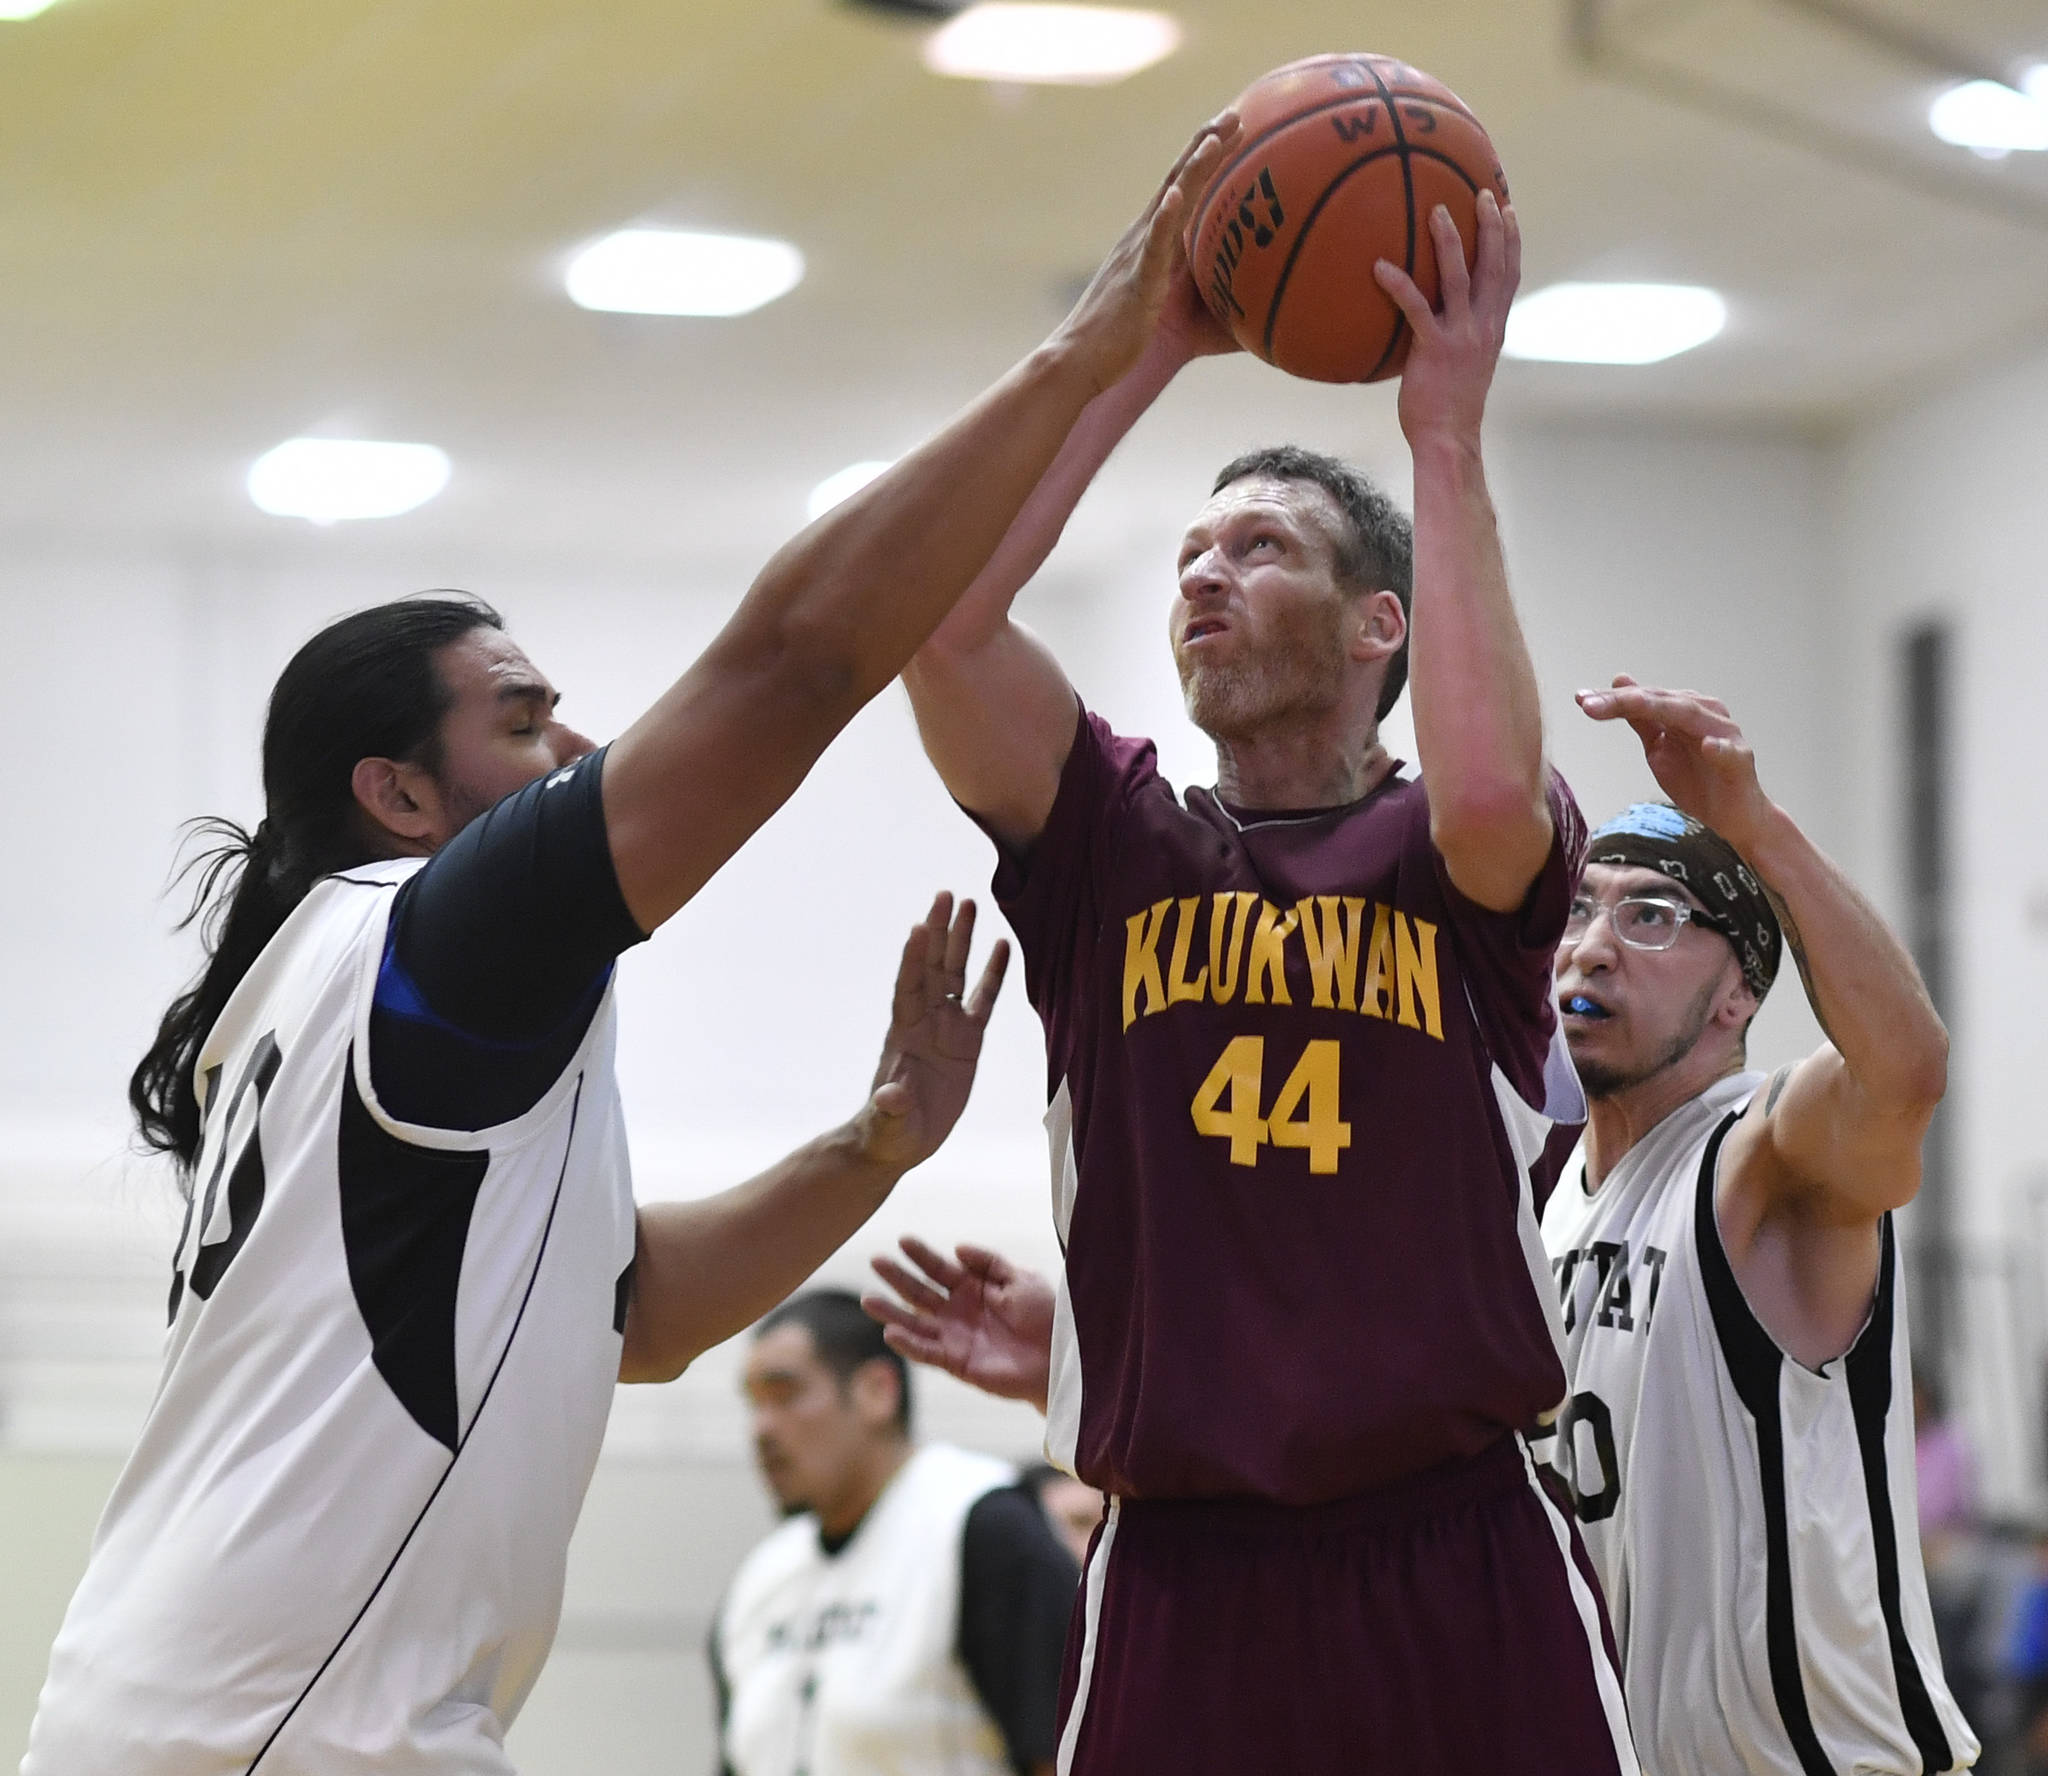 Klukwan’s Andrew Friske, center, shoots against Yakutat’s Derek James, left, at the Juneau Lions Club 73rd Annual Gold Medal Basketball Tournament at Juneau-Douglas High School: Yadaa.at Kalé on Tuesday, March 19, 2019. Friske was the recipient of the Dr. Walter A. Soboleff Award for his outstanding community involvement among other traits. (Michael Penn | Juneau Empire File)